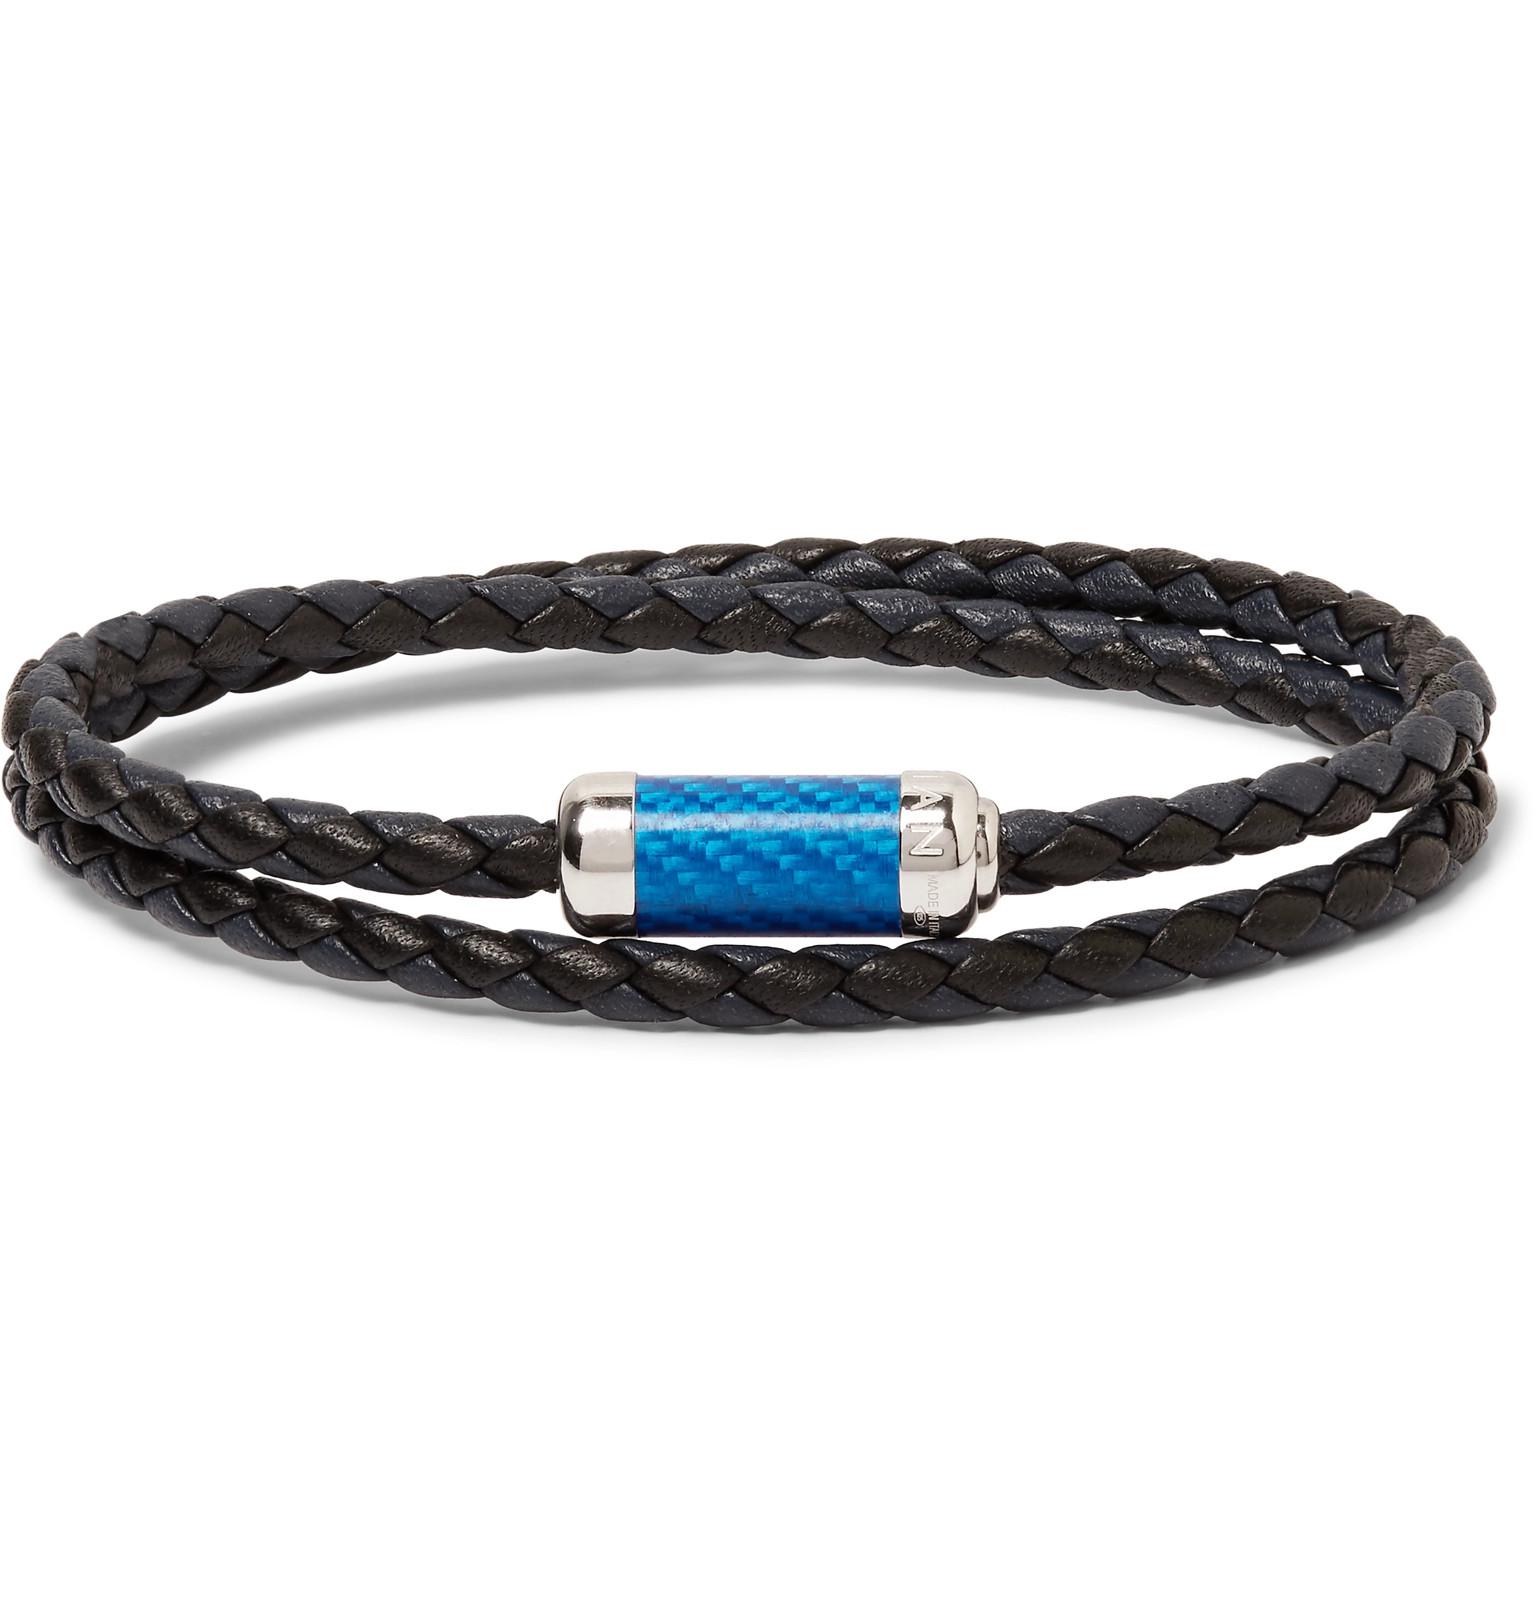 Tateossian Montecarlo Woven Leather And Sterling Silver Bracelet in Navy  (Blue) for Men - Lyst